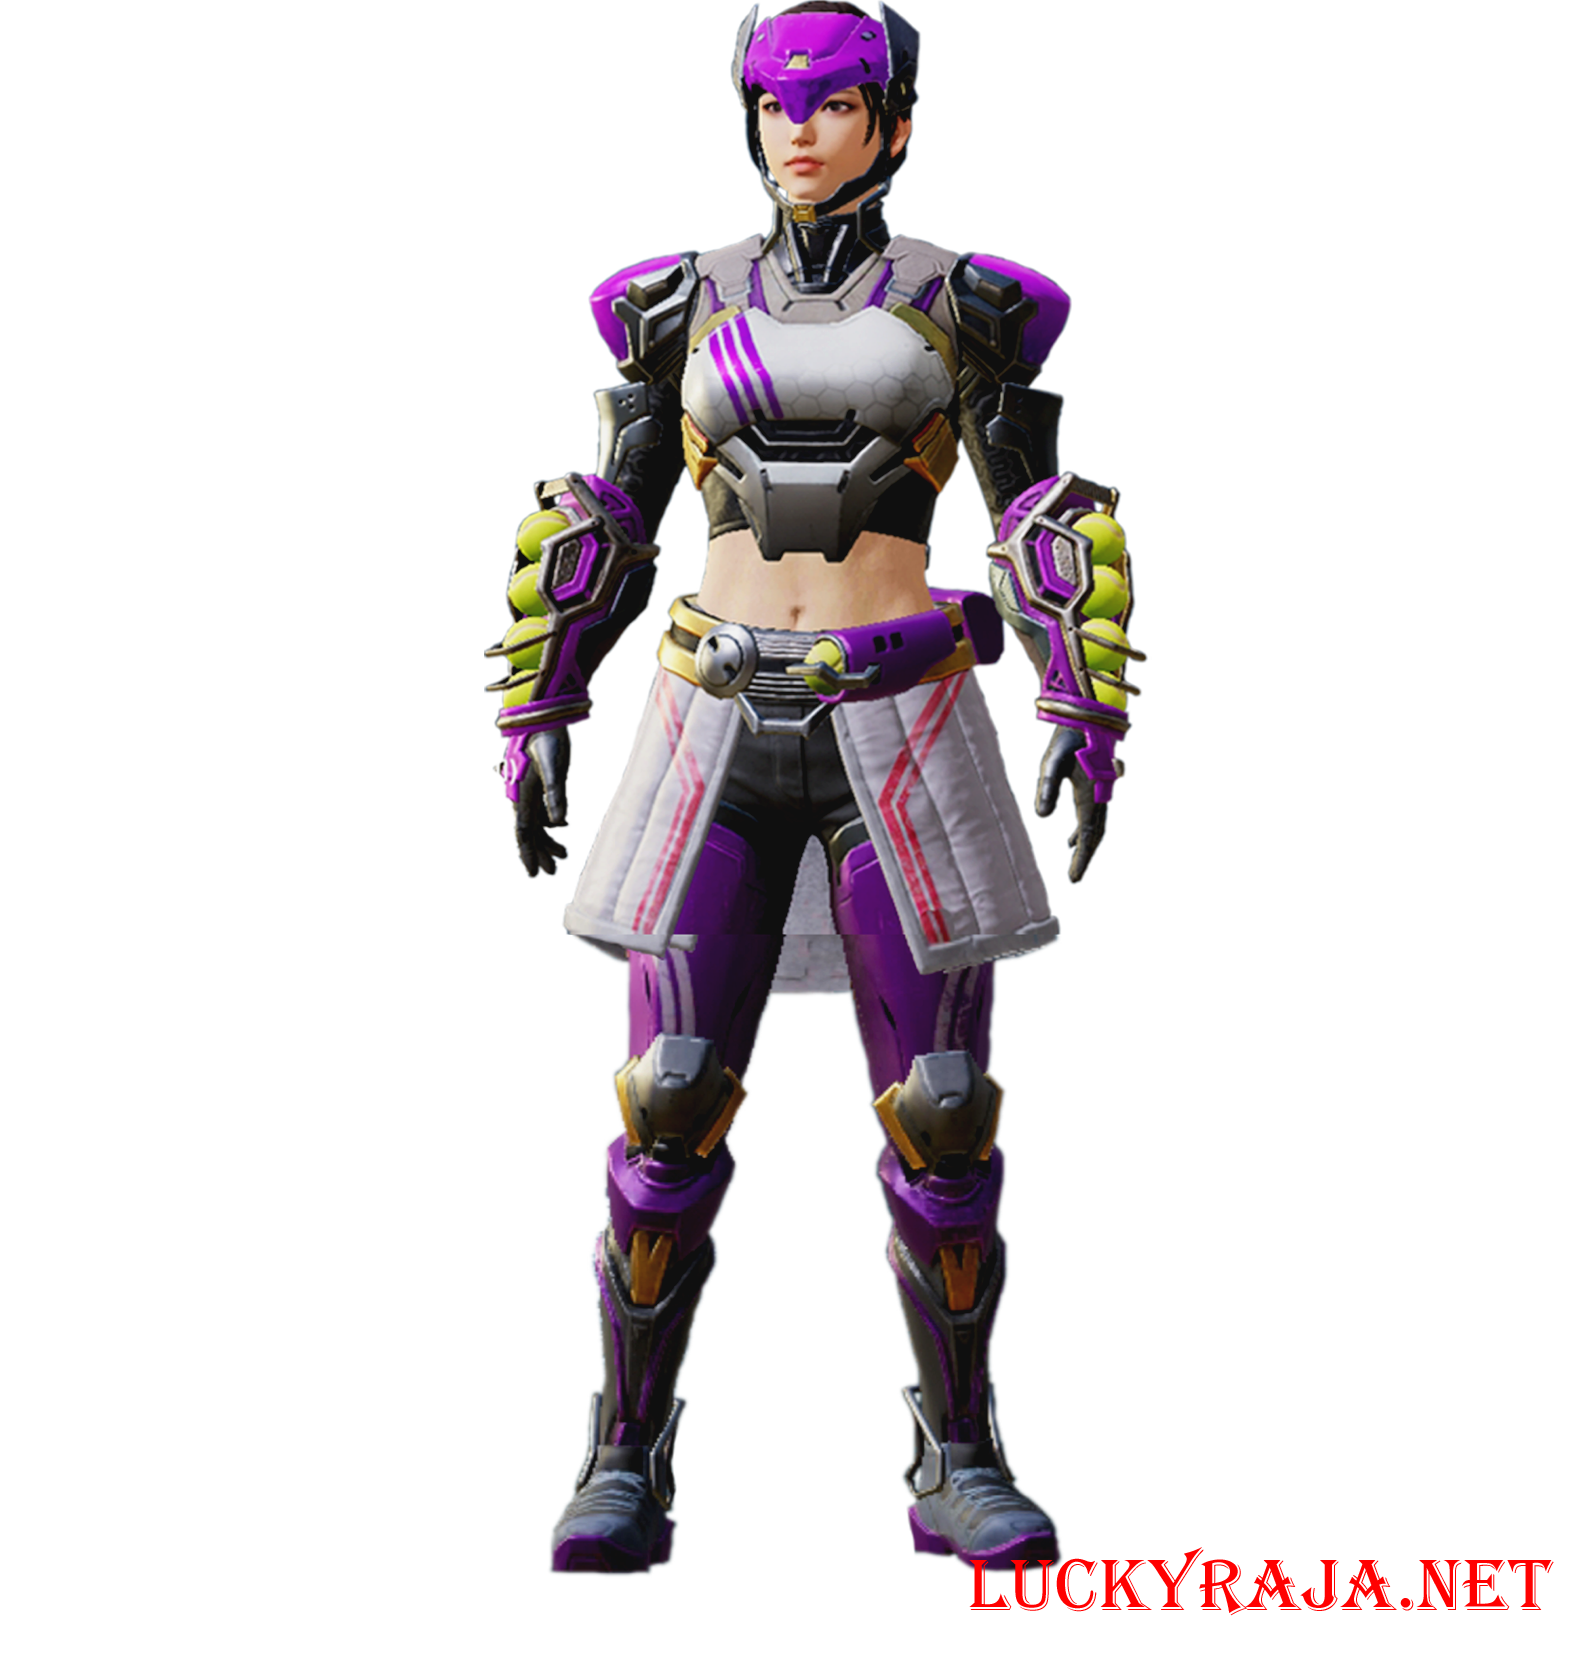 Genesis Knight ,Genesis Knight images,Genesis Knight set, Genesis Knight pubg mobile,Genesis Knight outfit,pubg mobile outfits,animation,cartoon images